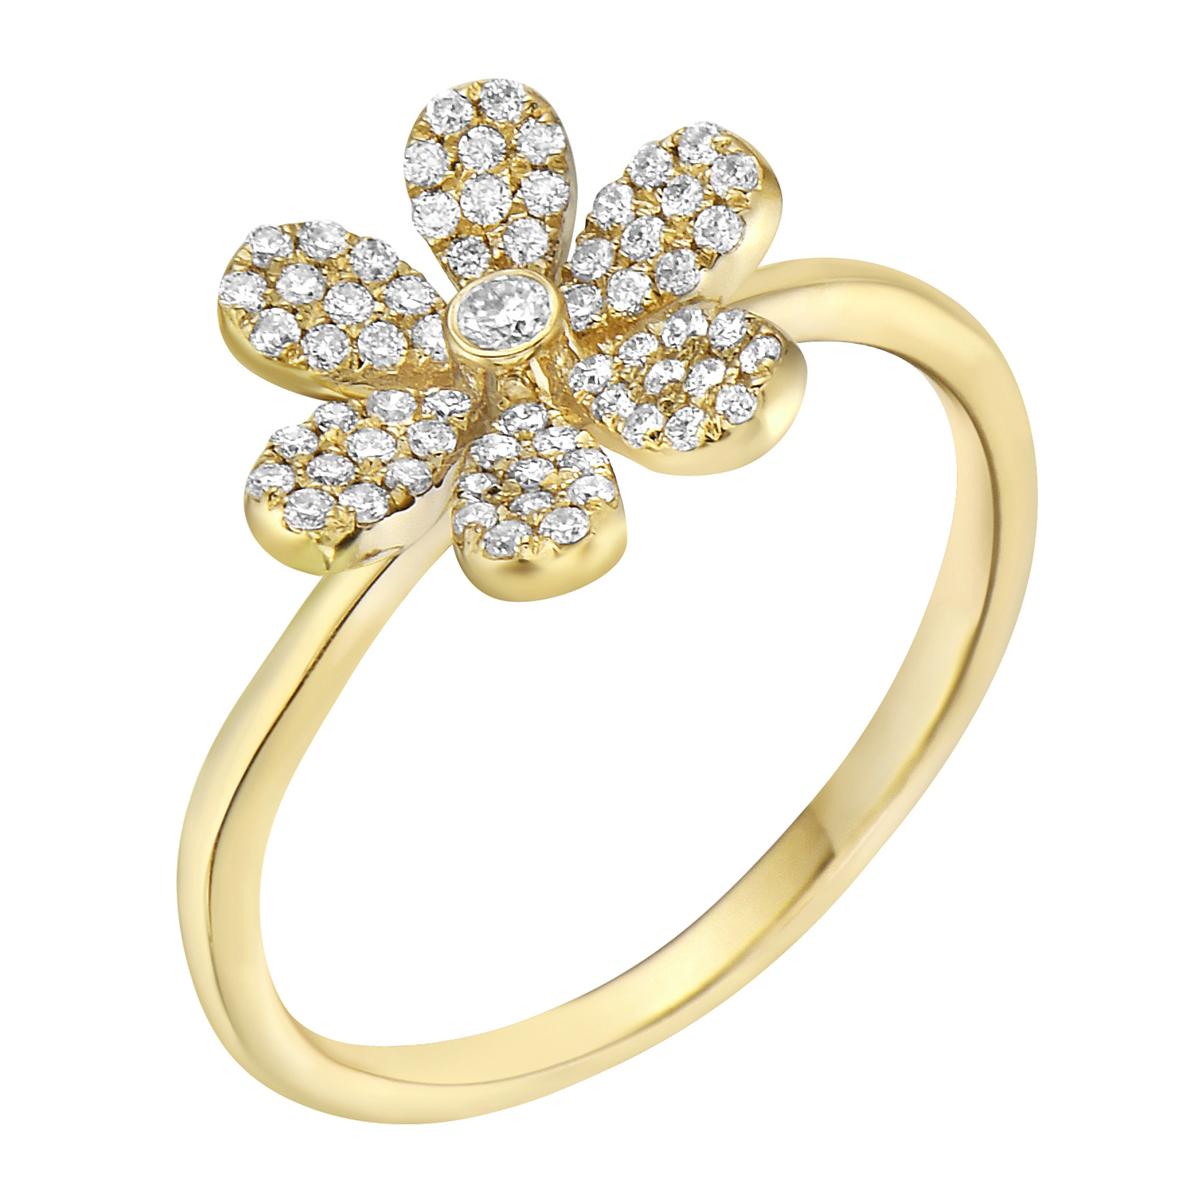 With this exquisite yellow gold diamond flower ring, style and glamour are in the spotlight. This 14 karat yellow gold ring is made from 1.9 grams of gold and is covered in 67 round SI1-SI2, GH color diamonds totaling 0.26ct. This ring is size 6.5.